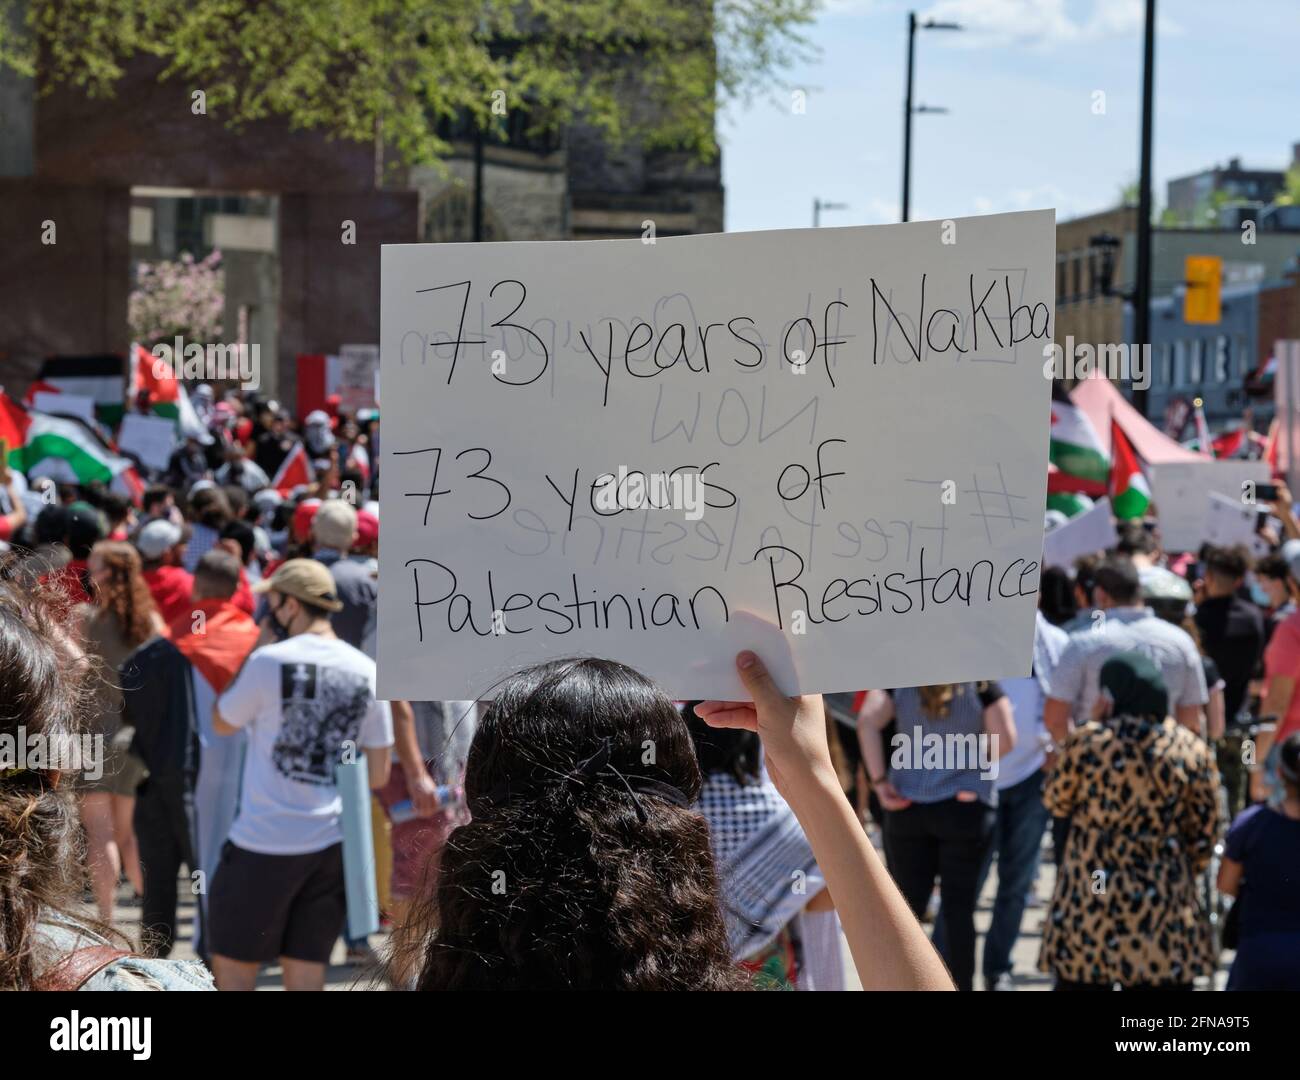 Ottawa, Canada. May 15th, 2021. On the Nakba day, commemorating the 1948 Palestinian forced Exodus from Palestinian territories, thousands of protesters gather and march through the street of Ottawa to demand that Palestine be freed from Israel occupation. The also denounce the increase of violence from the Israeli army over the last week, and demand that the Canadian government speak up about the attacks of Palestinians in Gaza, Jerusalem, West bank and all of Palestine. Credit: meanderingemu/Alamy Live News Stock Photo